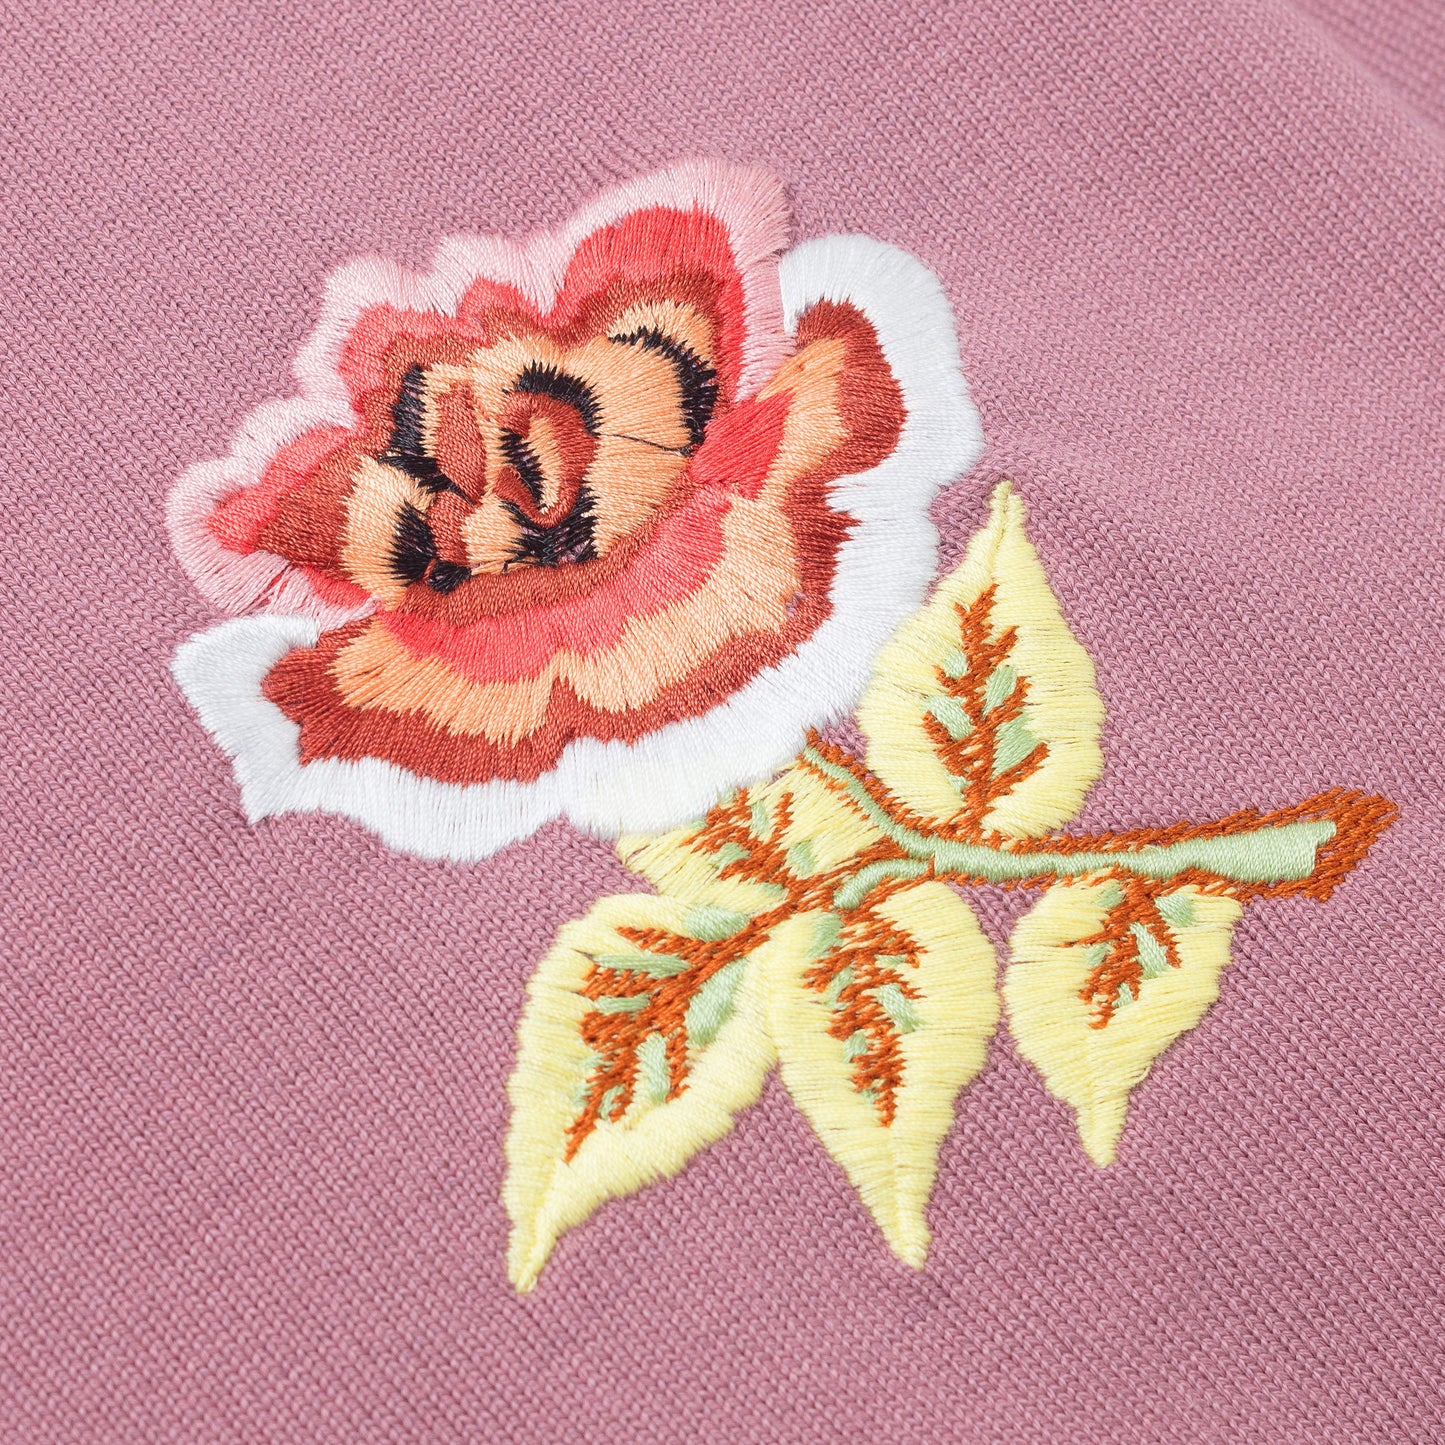 Embroidered rose patch.